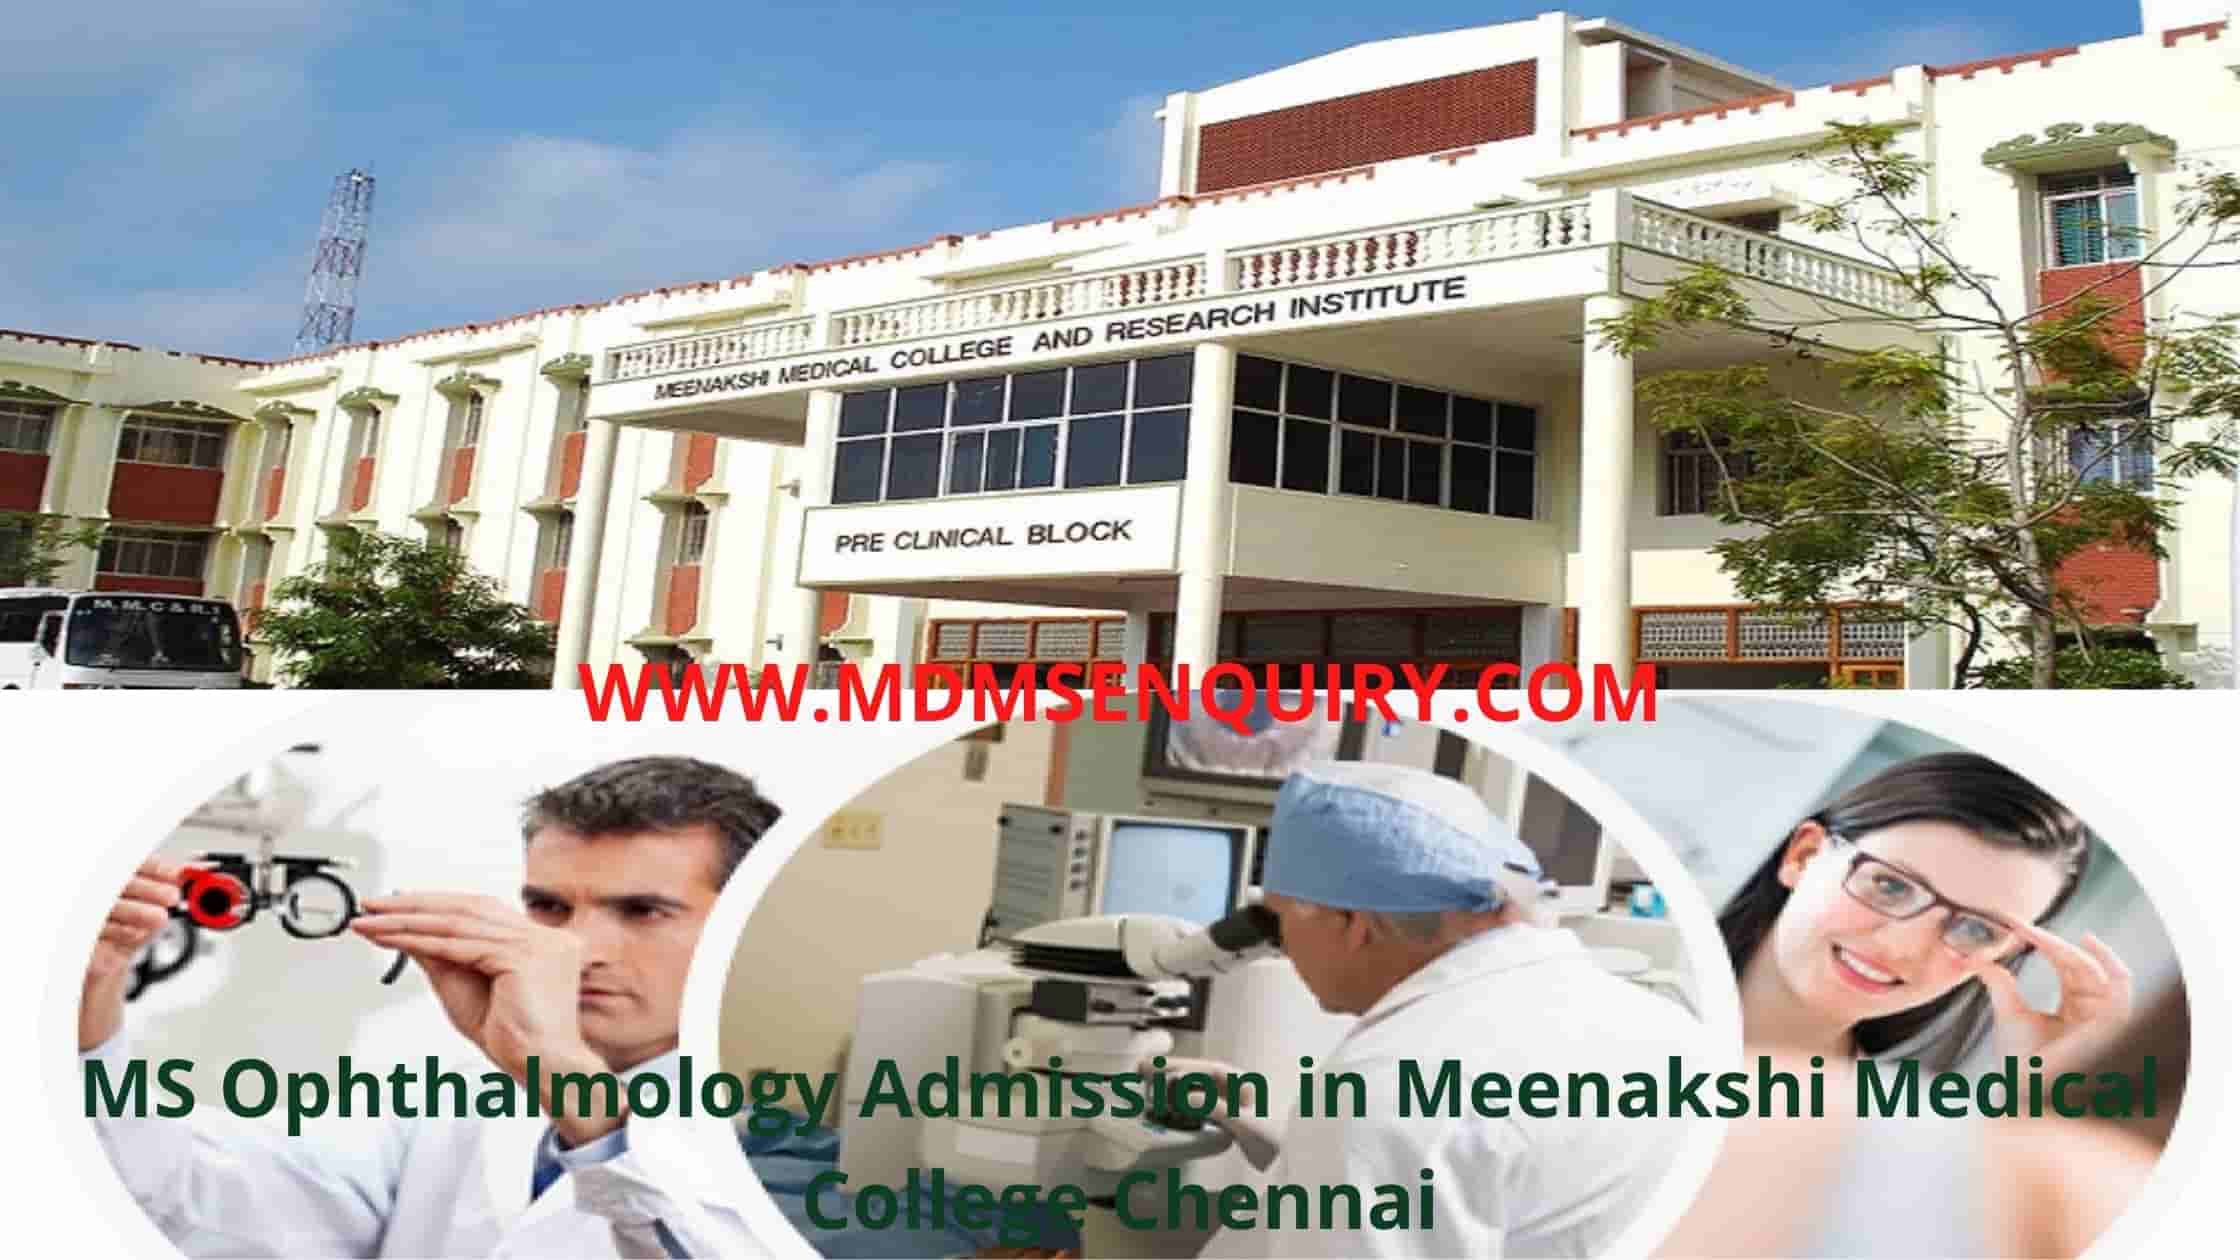 MS Ophthalmology admission in Meenakshi Medical College Chennai